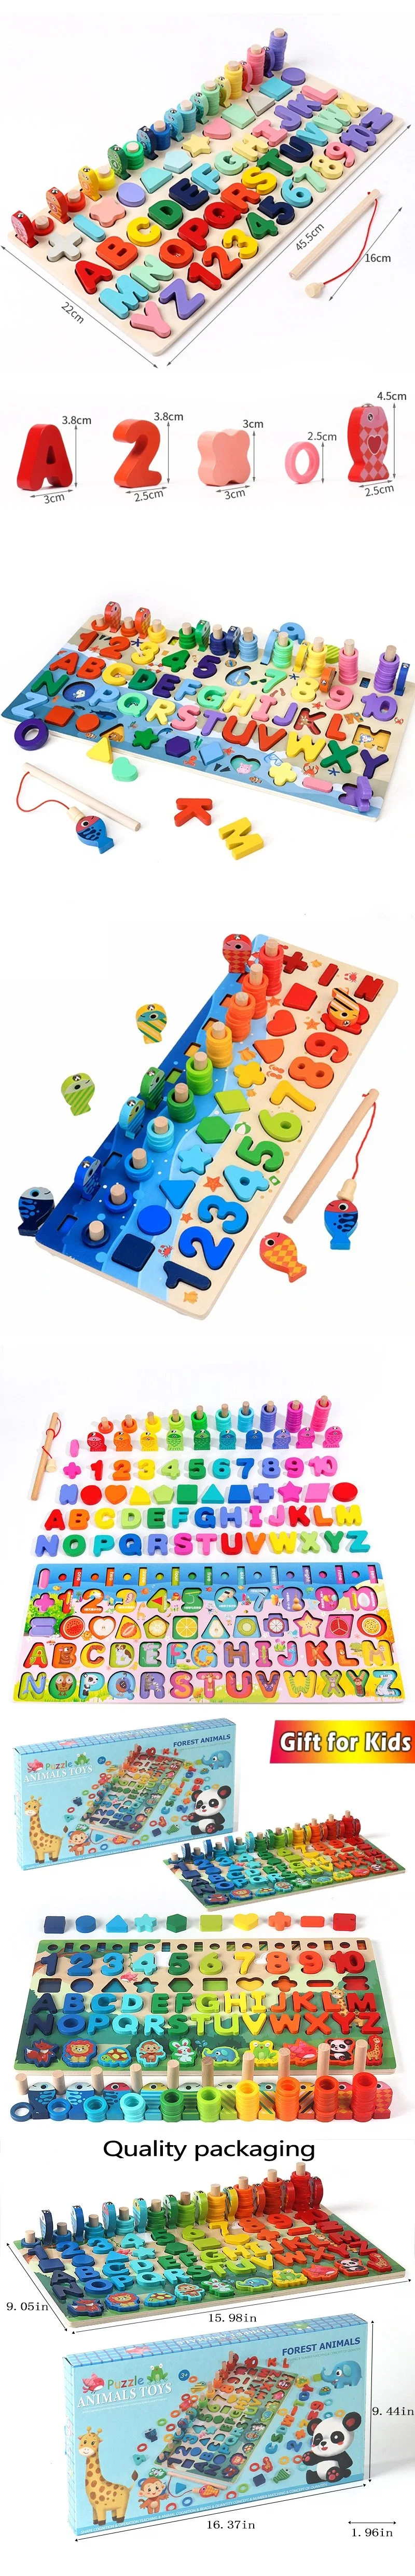 China Factory Wholesale Montessori Cheap Small Children Kids Baby Educational Wooden Toys